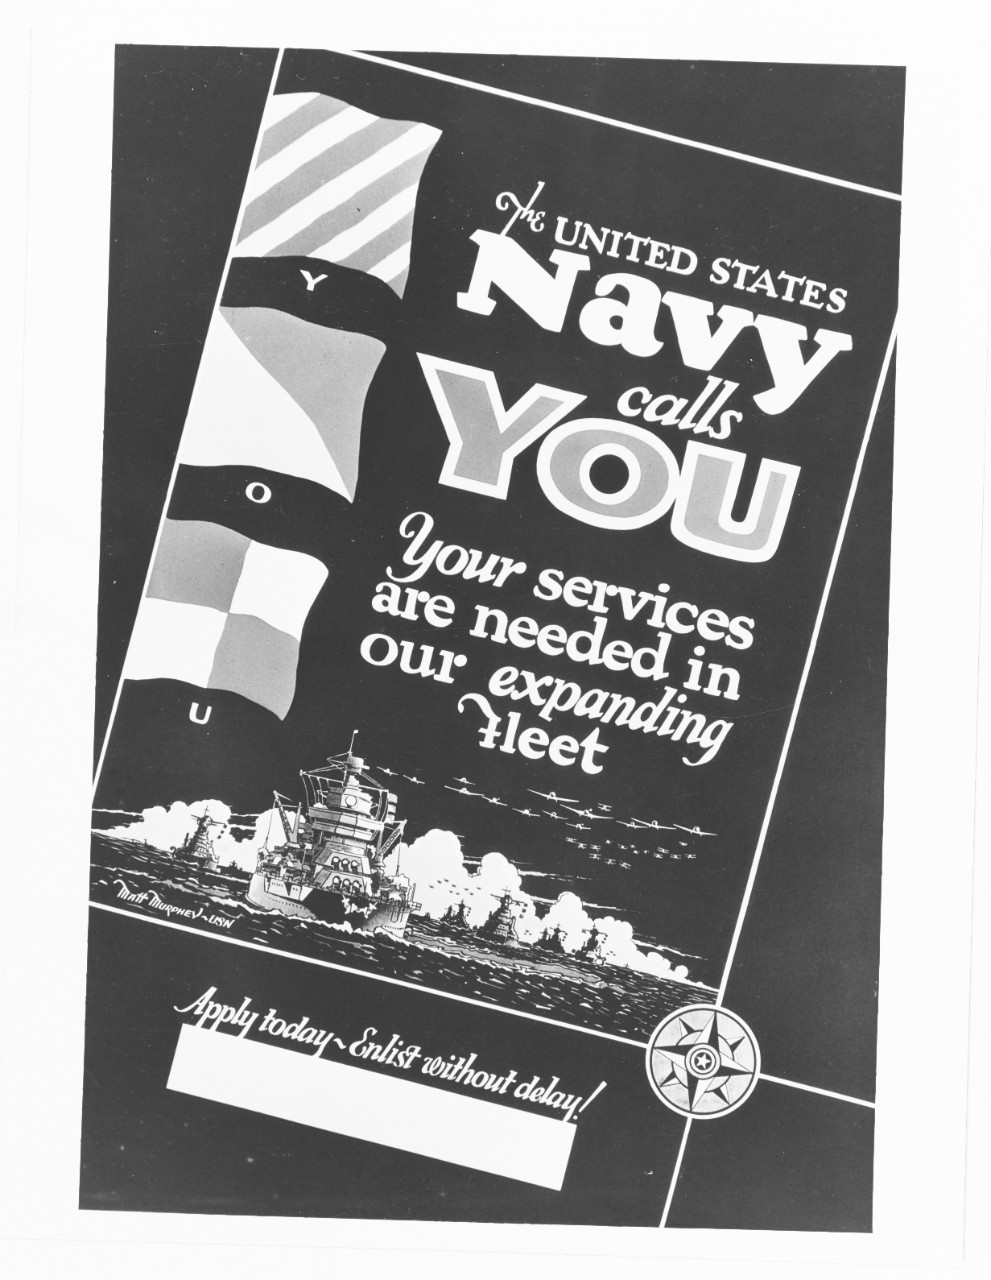 Navy poster, "The United States Navy calls You"